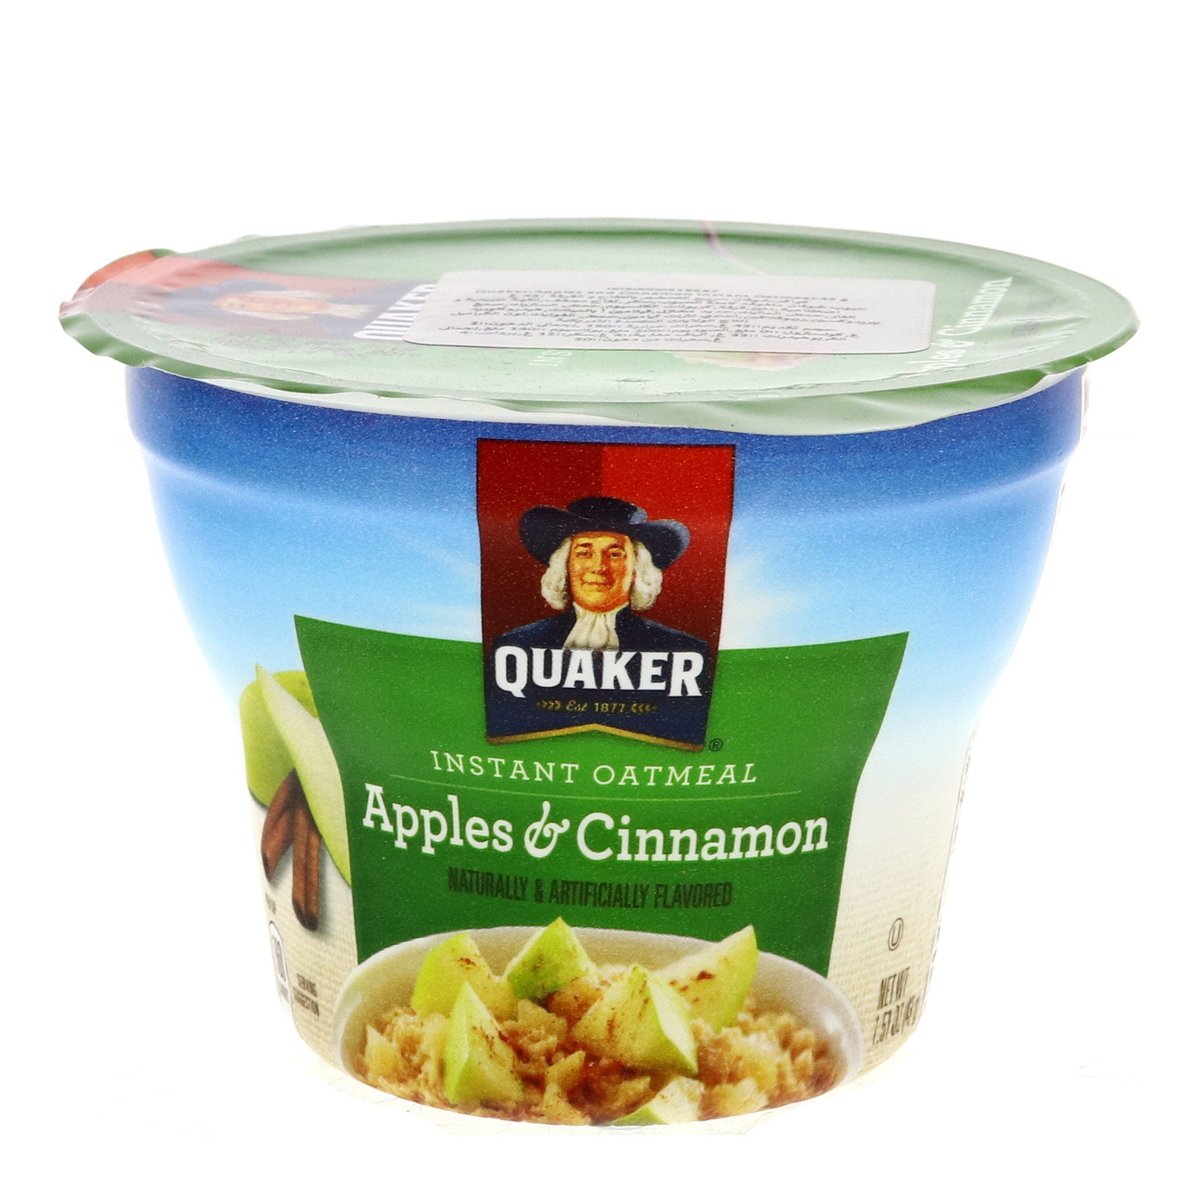 Quaker Instant Oatmeal Apples And Cinnamon 43 g